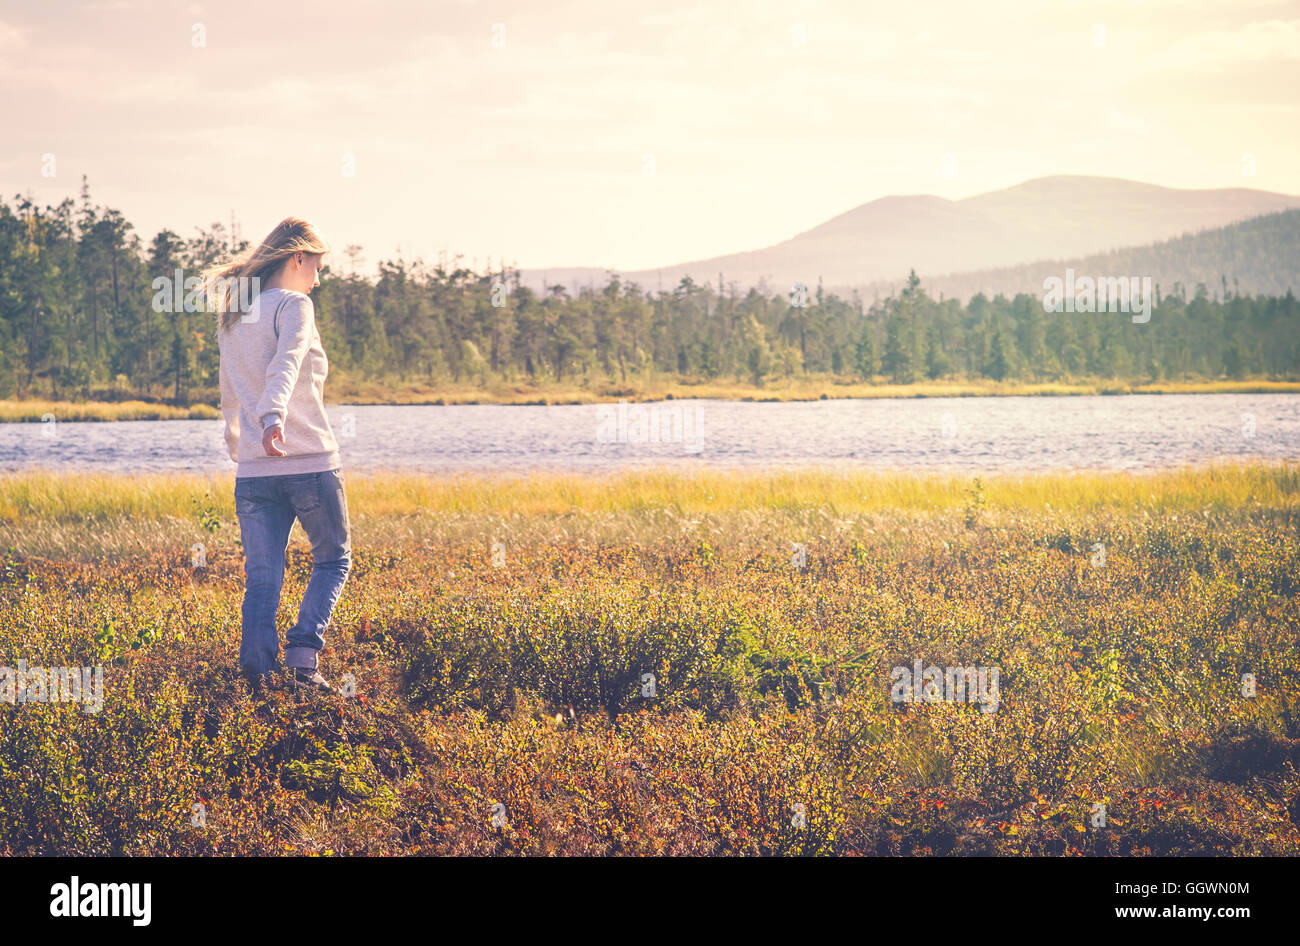 Woman Traveler walking alone Travel Lifestyle concept Summer vacations outdoor tundra forest on background Stock Photo